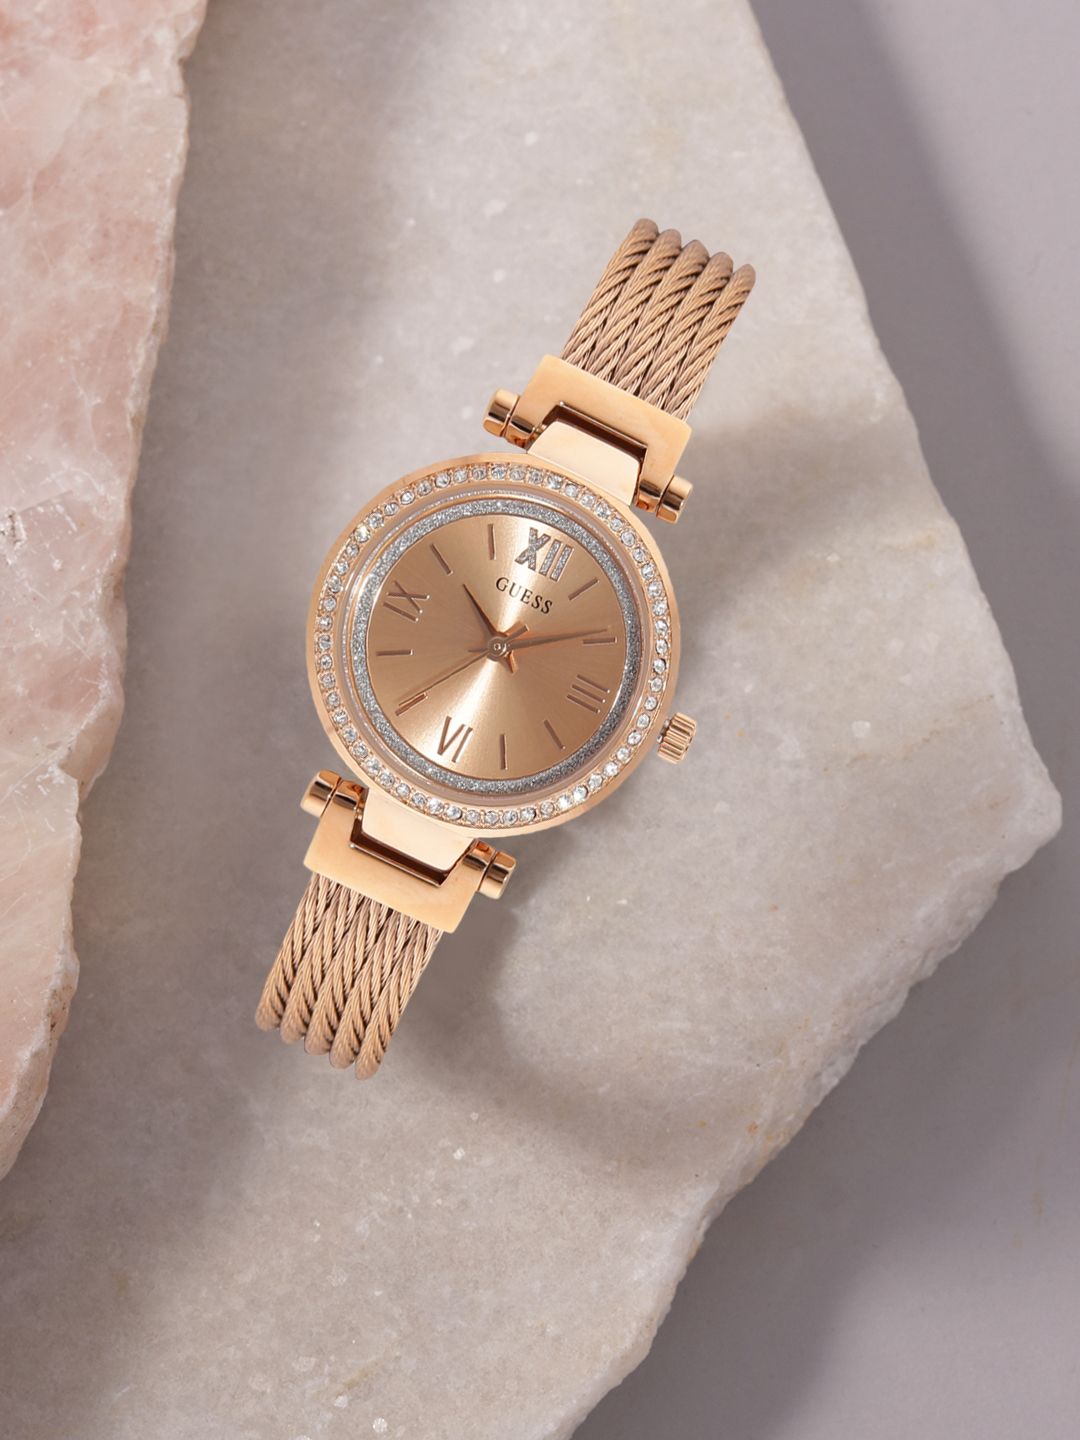 GUESS Women Rose Gold-Toned Analogue Watch Price in India